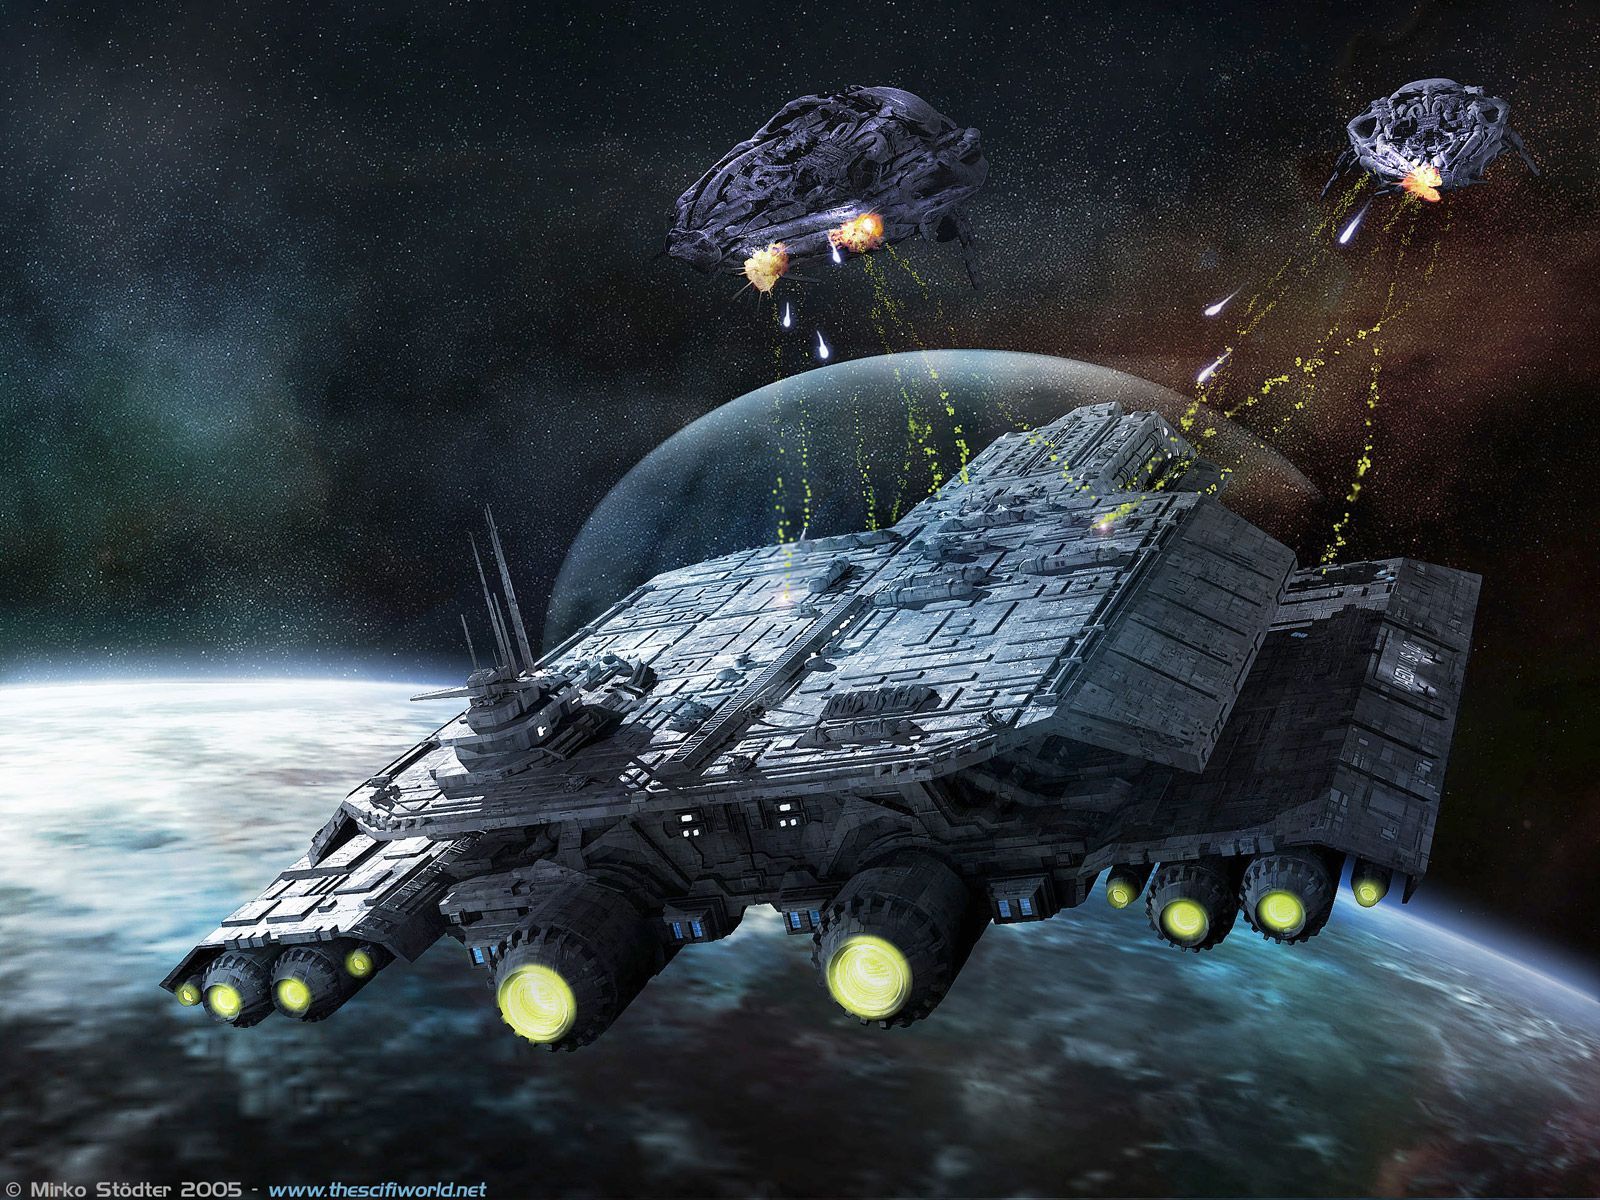 Space Battle Wallpaper to Cover Your Desktop in Glory. Stargate ships, Stargate, Space battles